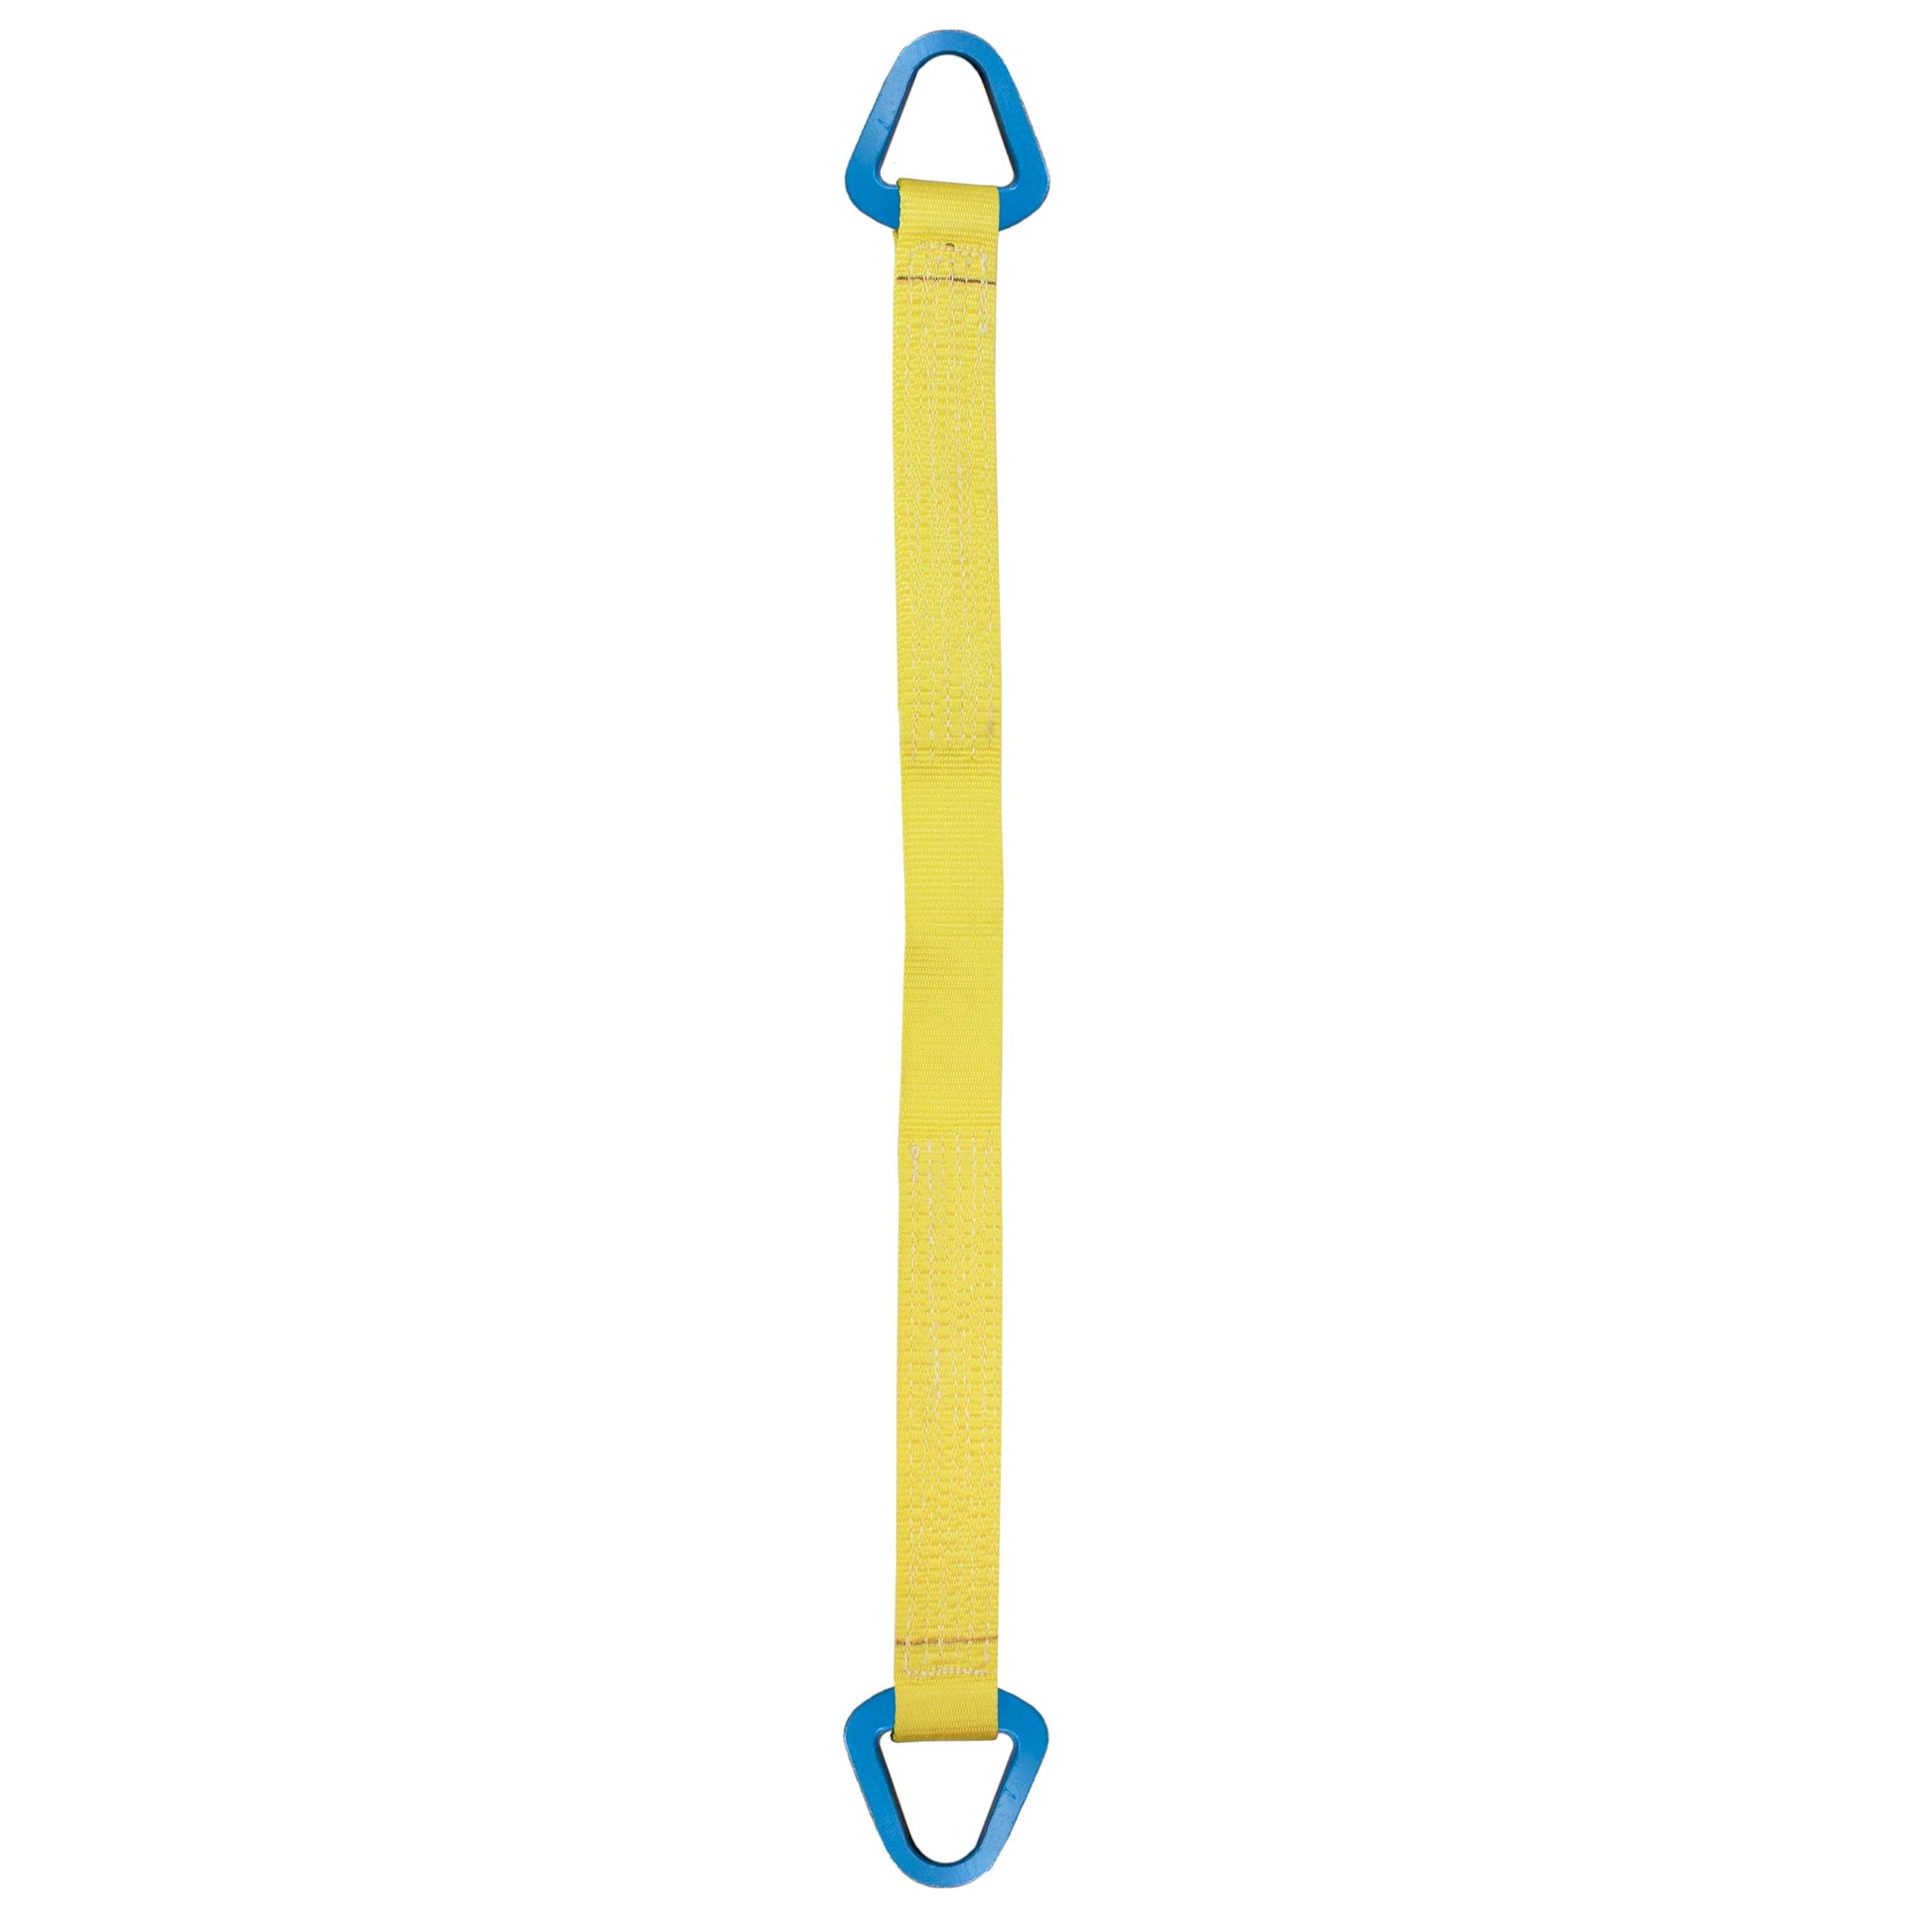 Nylon Lifting Sling Triangle 12 inch x 4 foot 2ply image 1 of 2